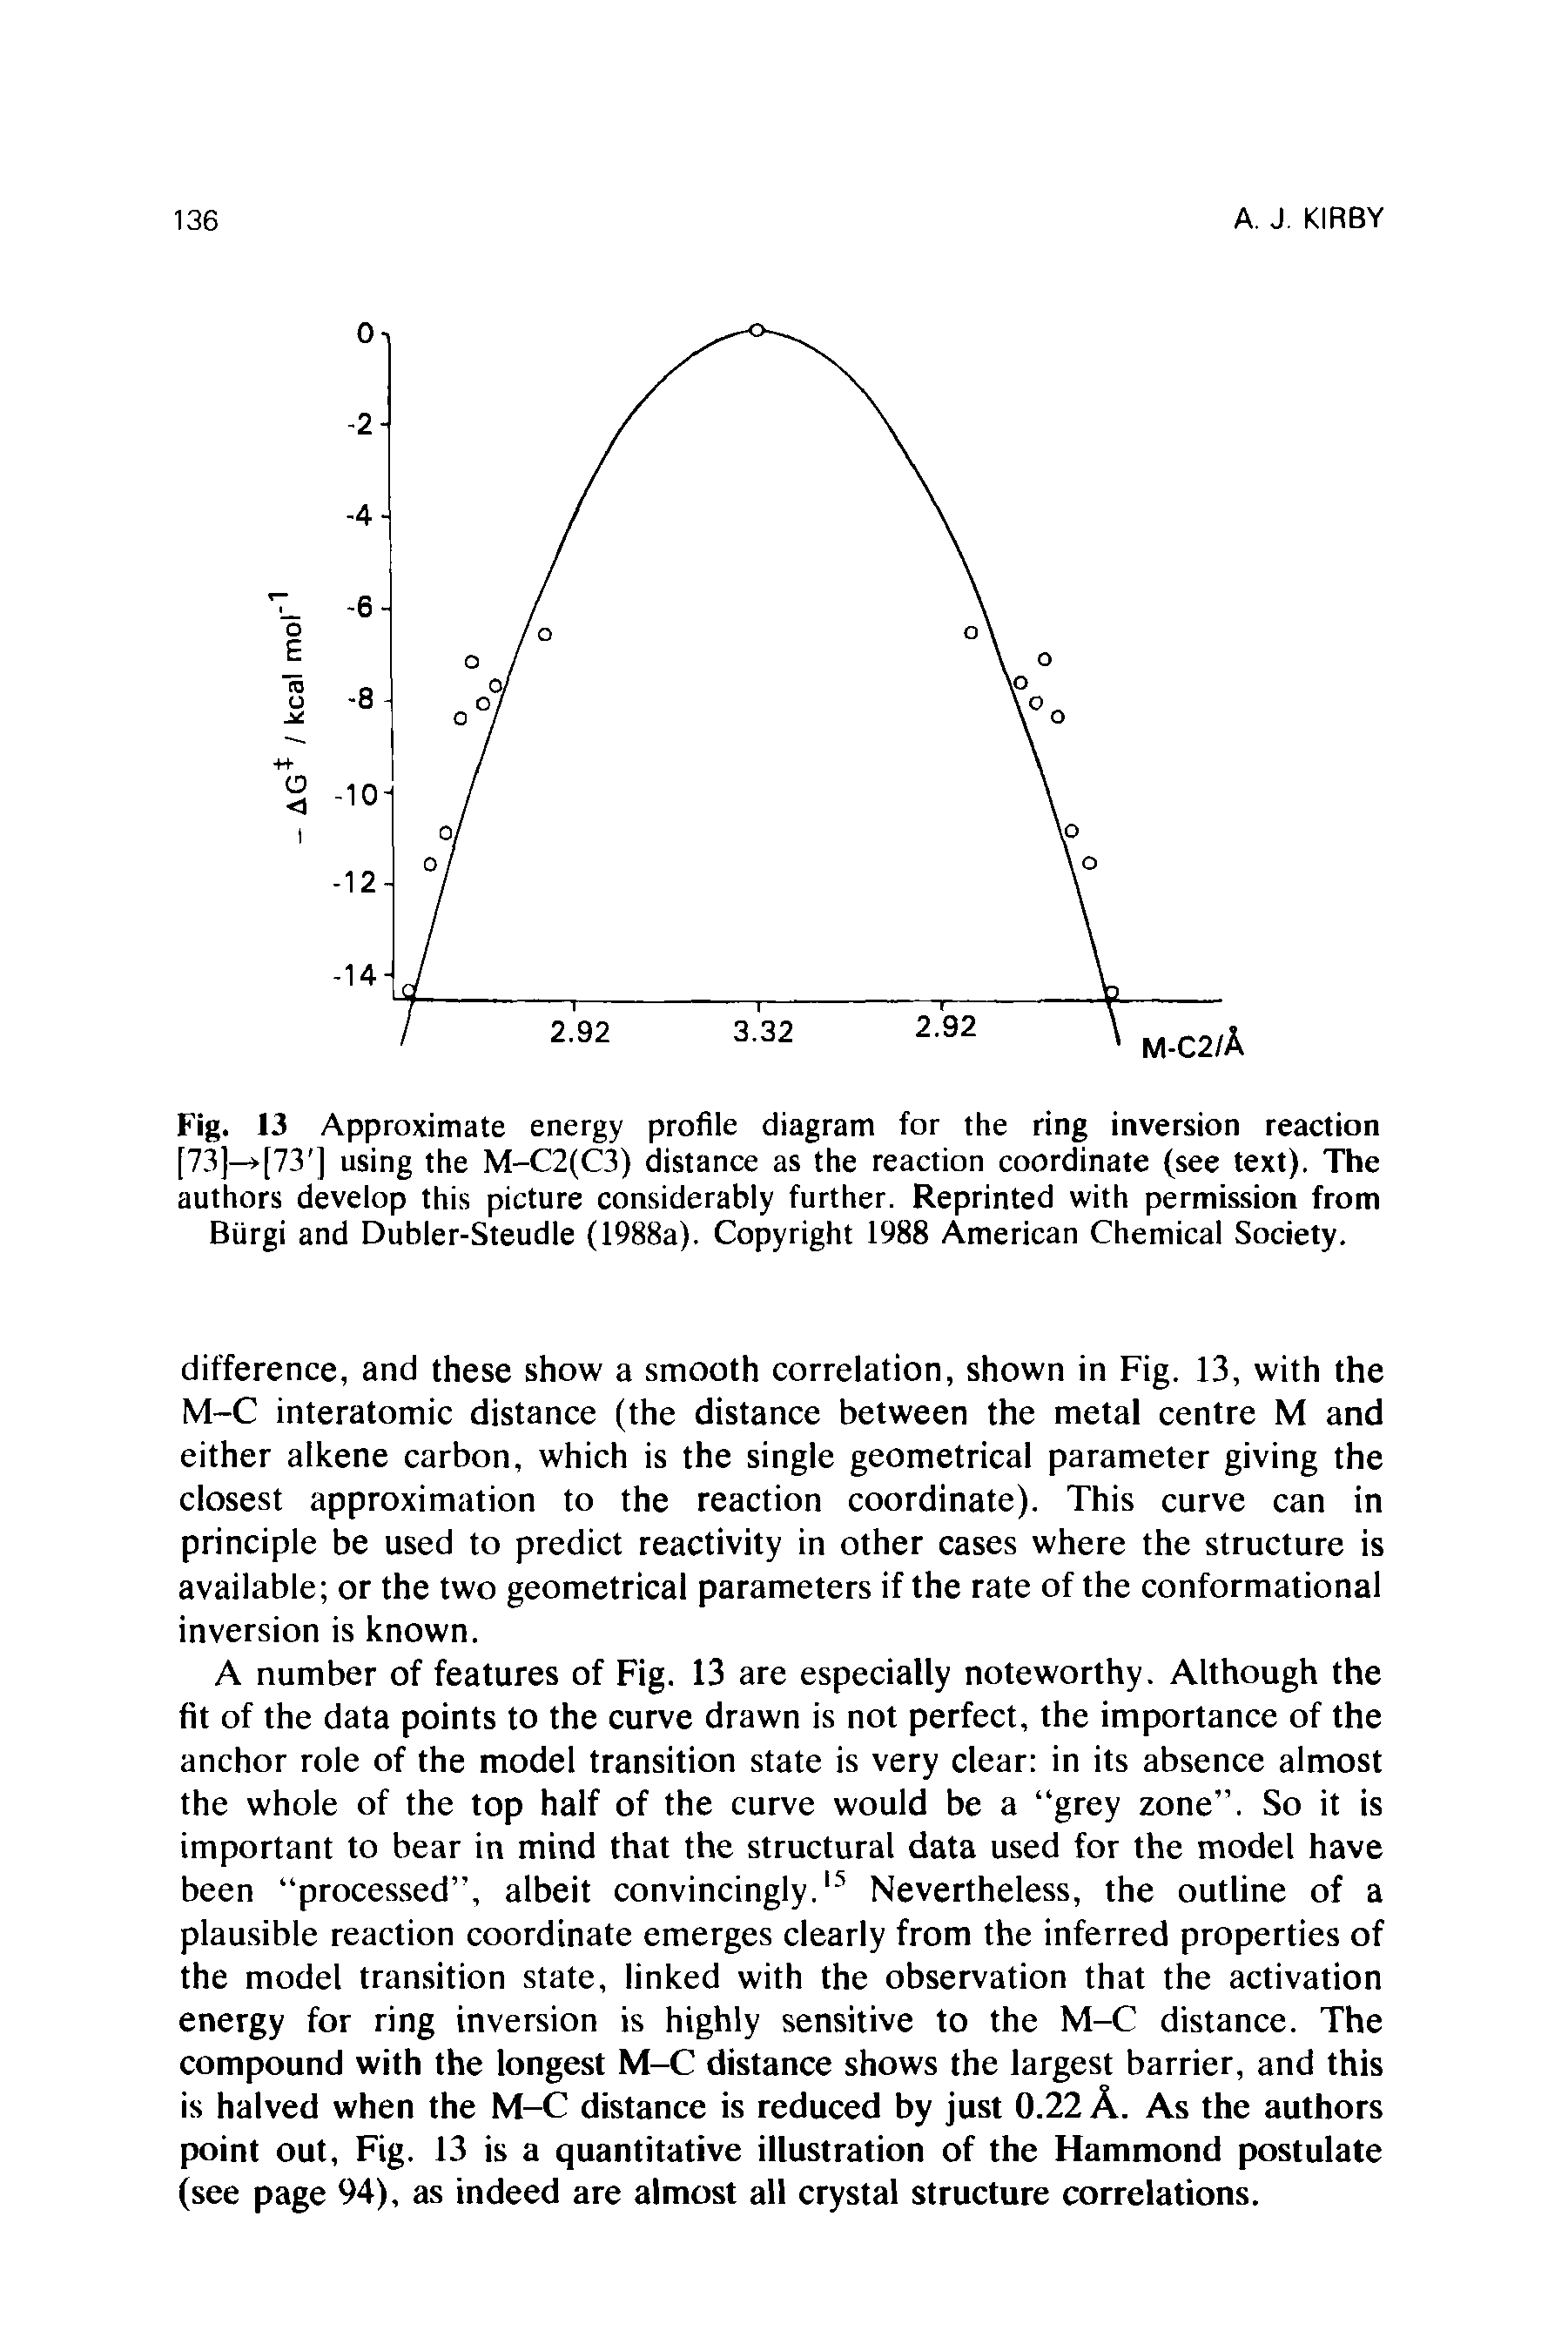 Fig. 13 Approximate energy profile diagram for the ring inversion reaction [73]—>[73 ] using the M-C2(C3) distance as the reaction coordinate (see text). The authors develop this picture considerably further. Reprinted with permission from Biirgi and Dubler-Steudle (1988a). Copyright 1988 American Chemical Society.